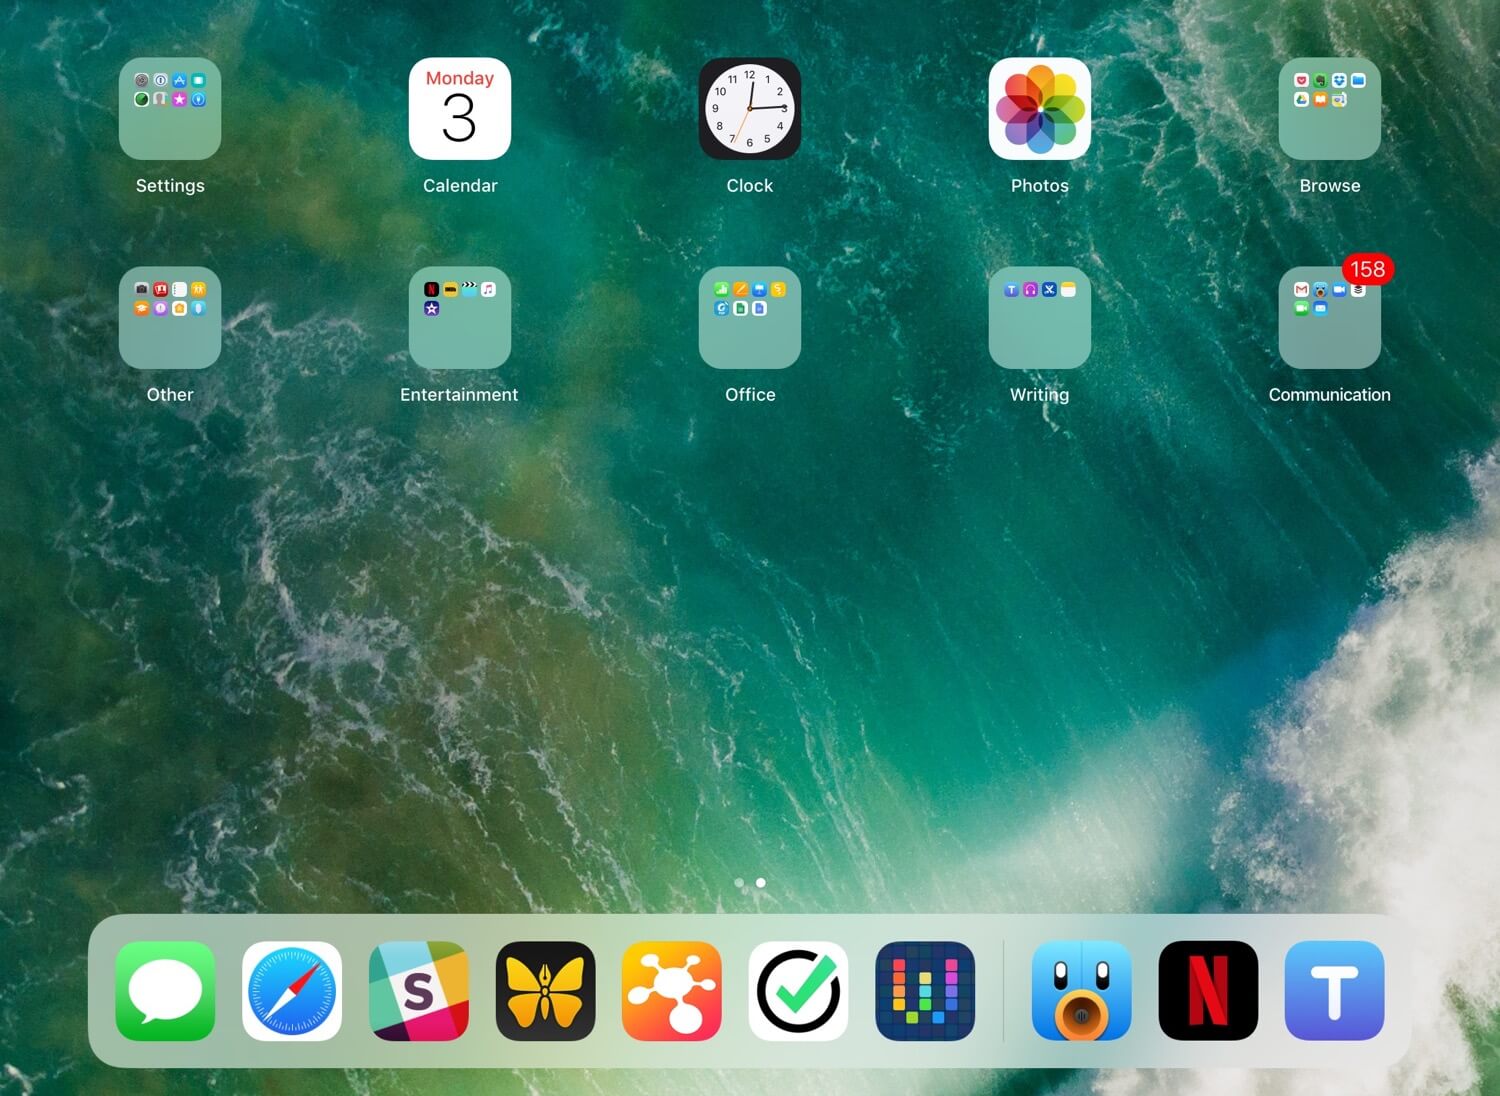 How setting up a new iPad Pro for work is an exercise in minimalism and focus